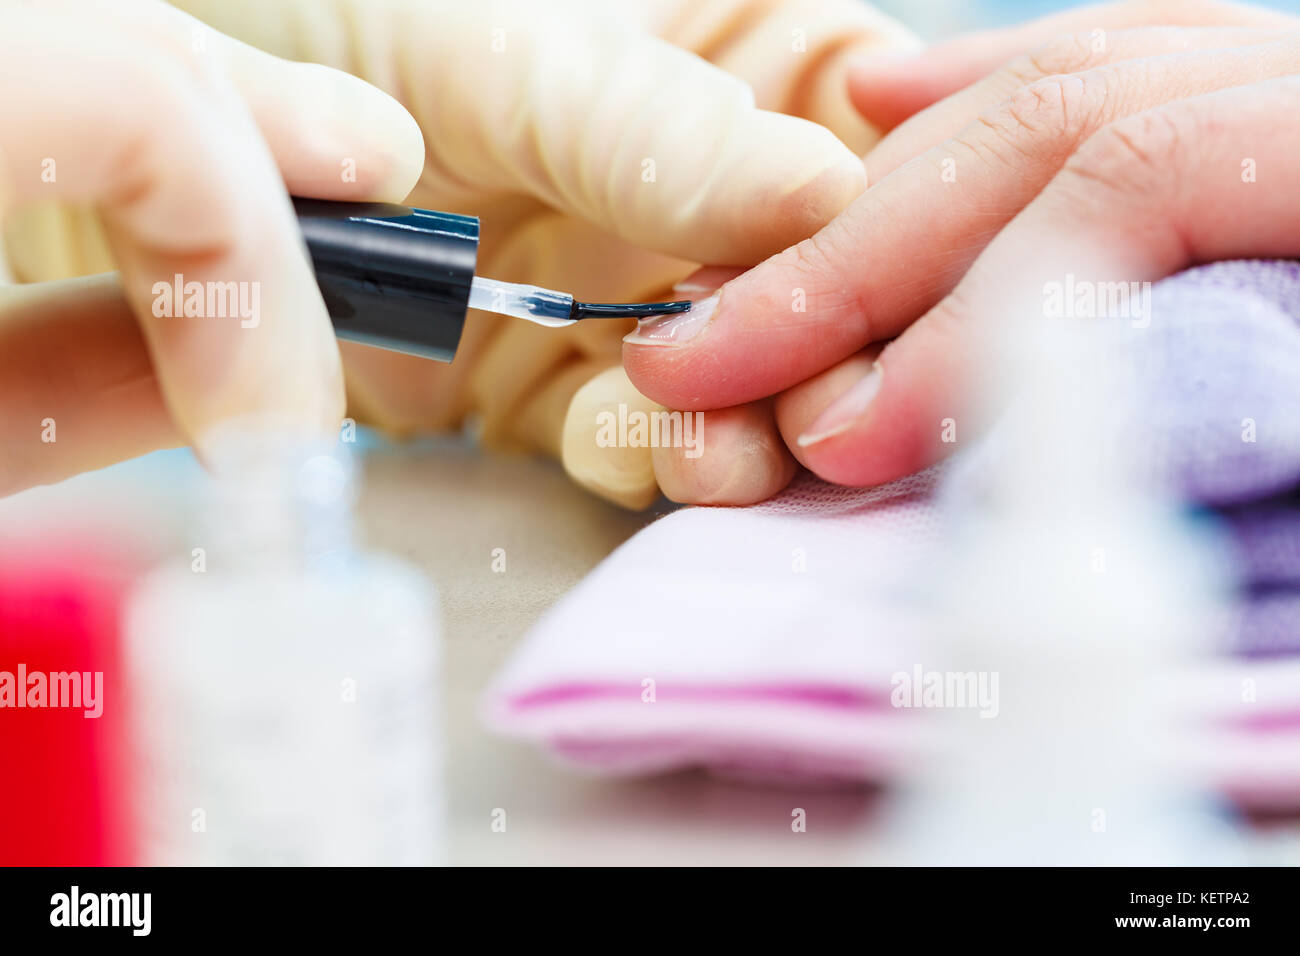 Nail care in the beauty salon Stock Photo